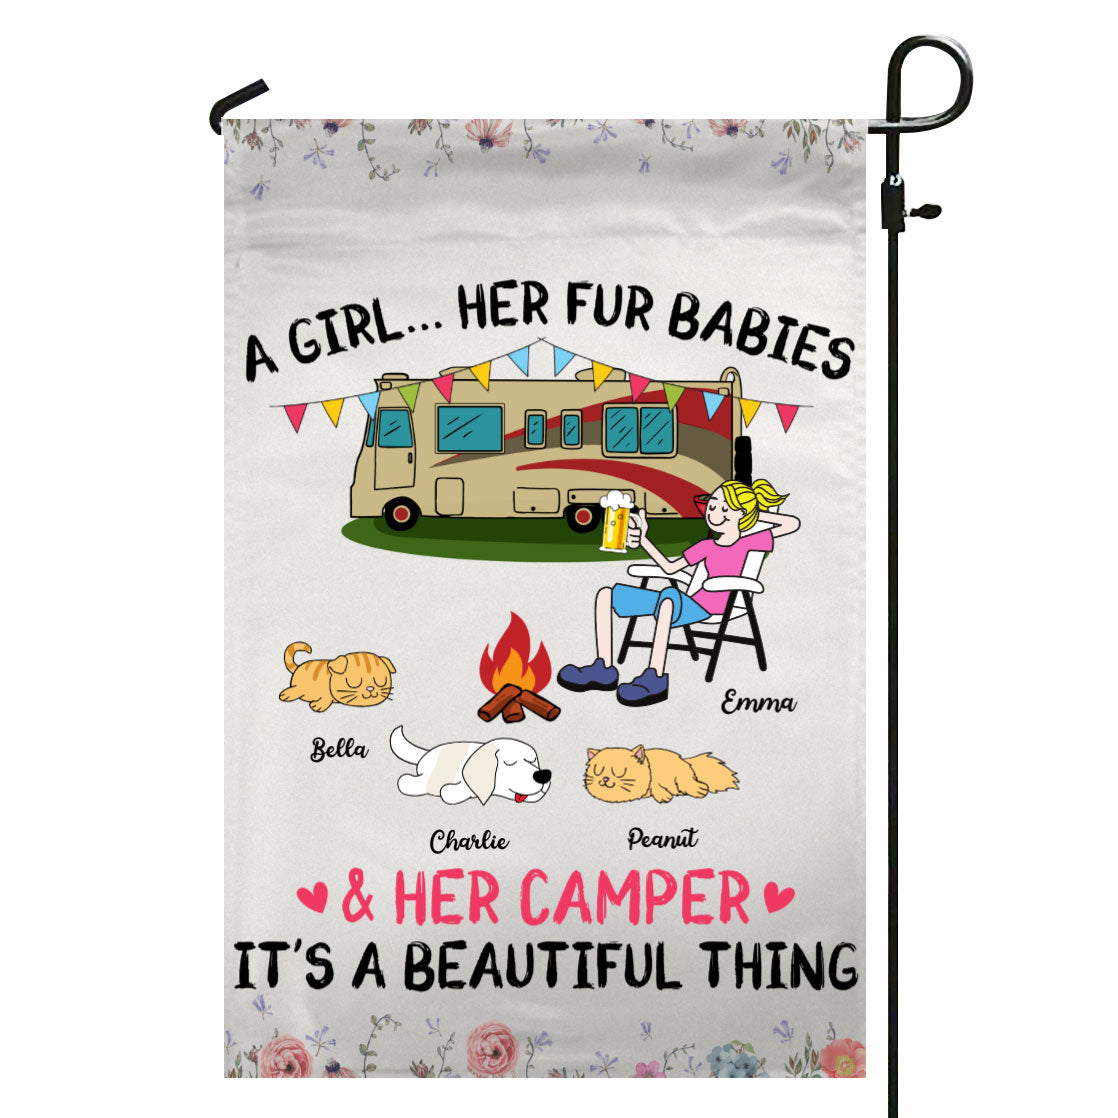 A Camping Girl And Her Fur Babies Personalized Garden Flag